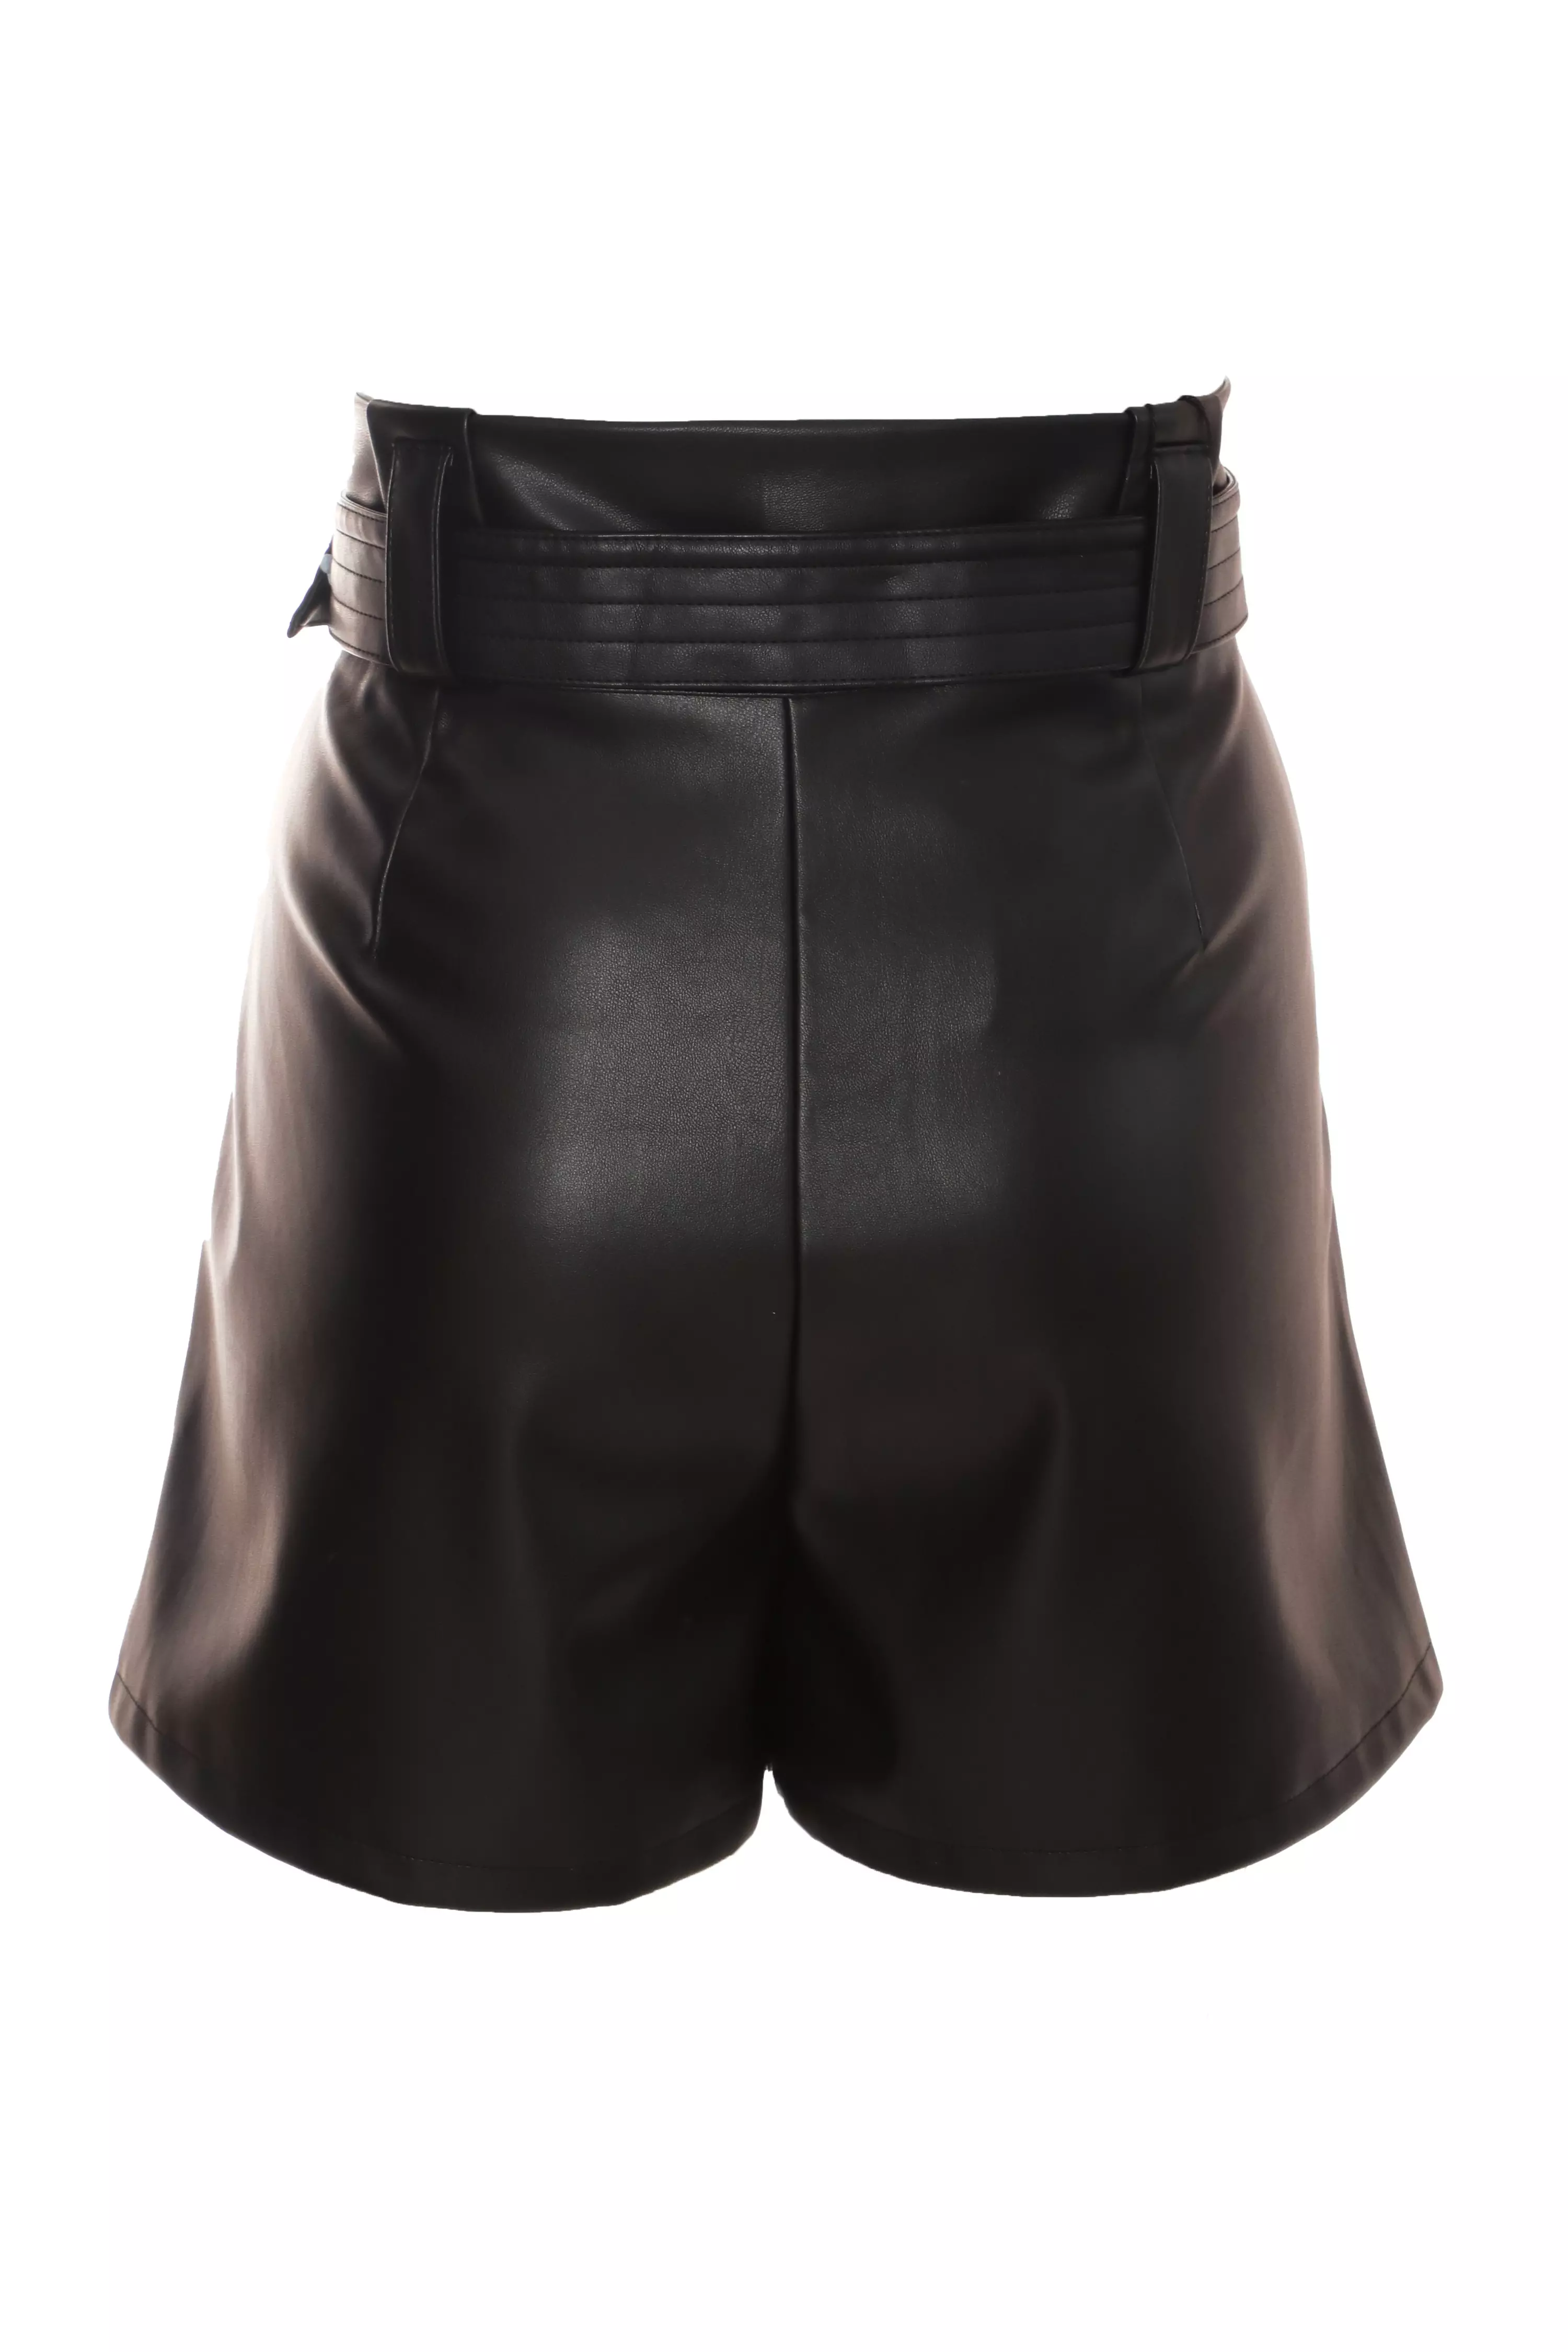 Black Faux Leather Belted Shorts - QUIZ Clothing